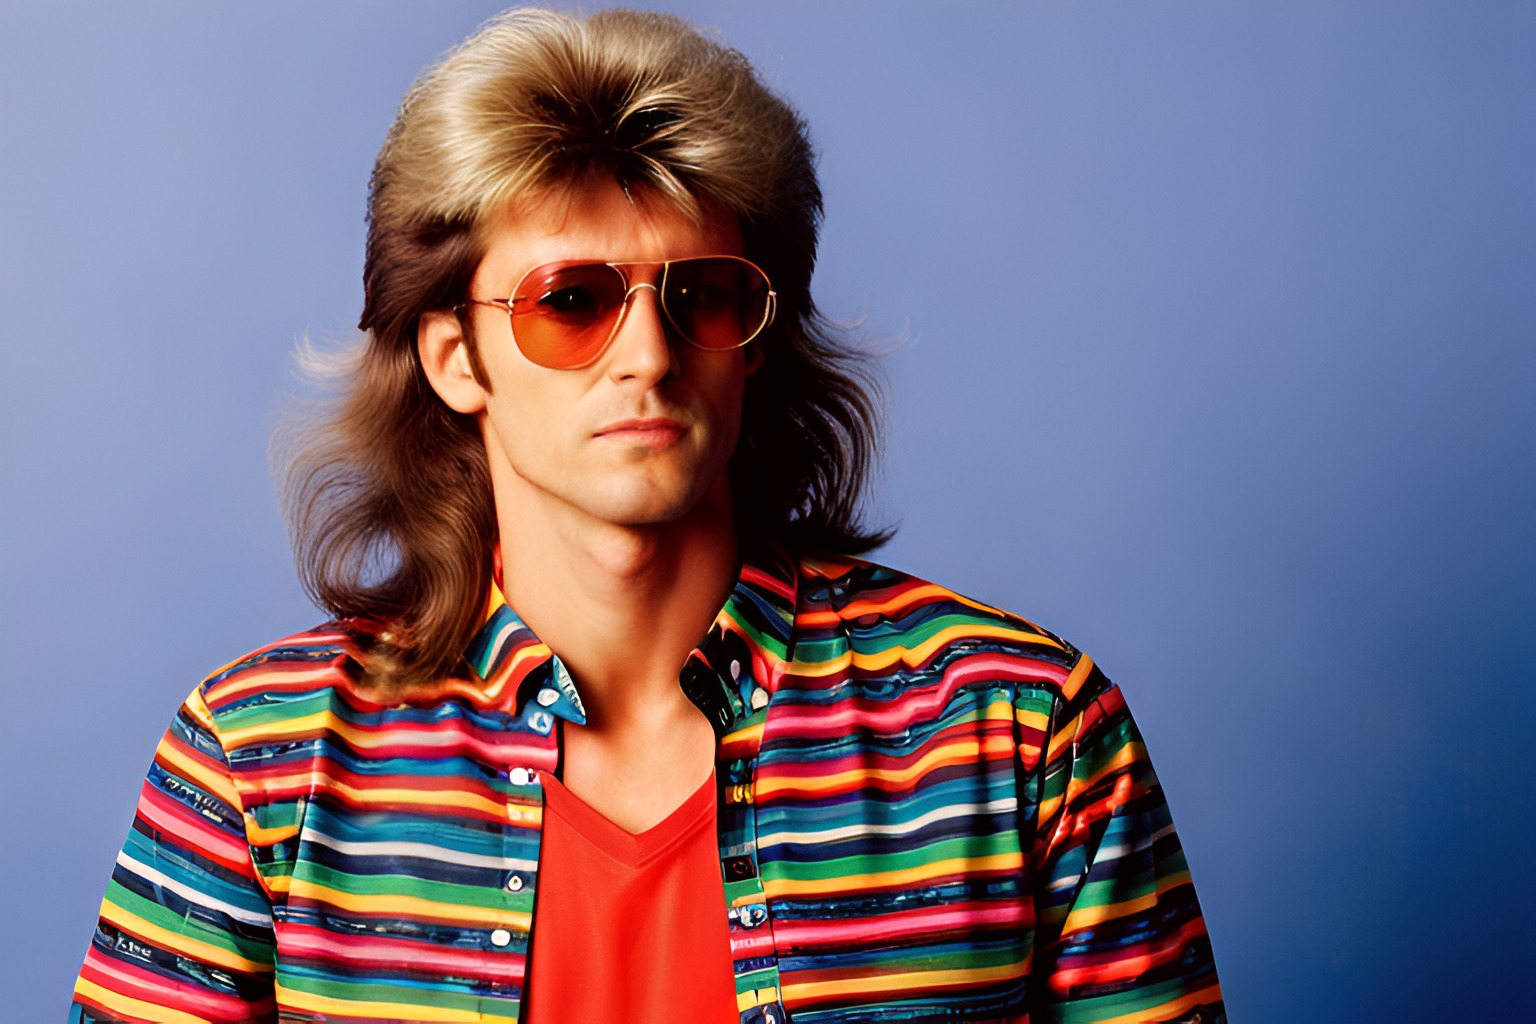 Celebrity from the 1980s with mullet